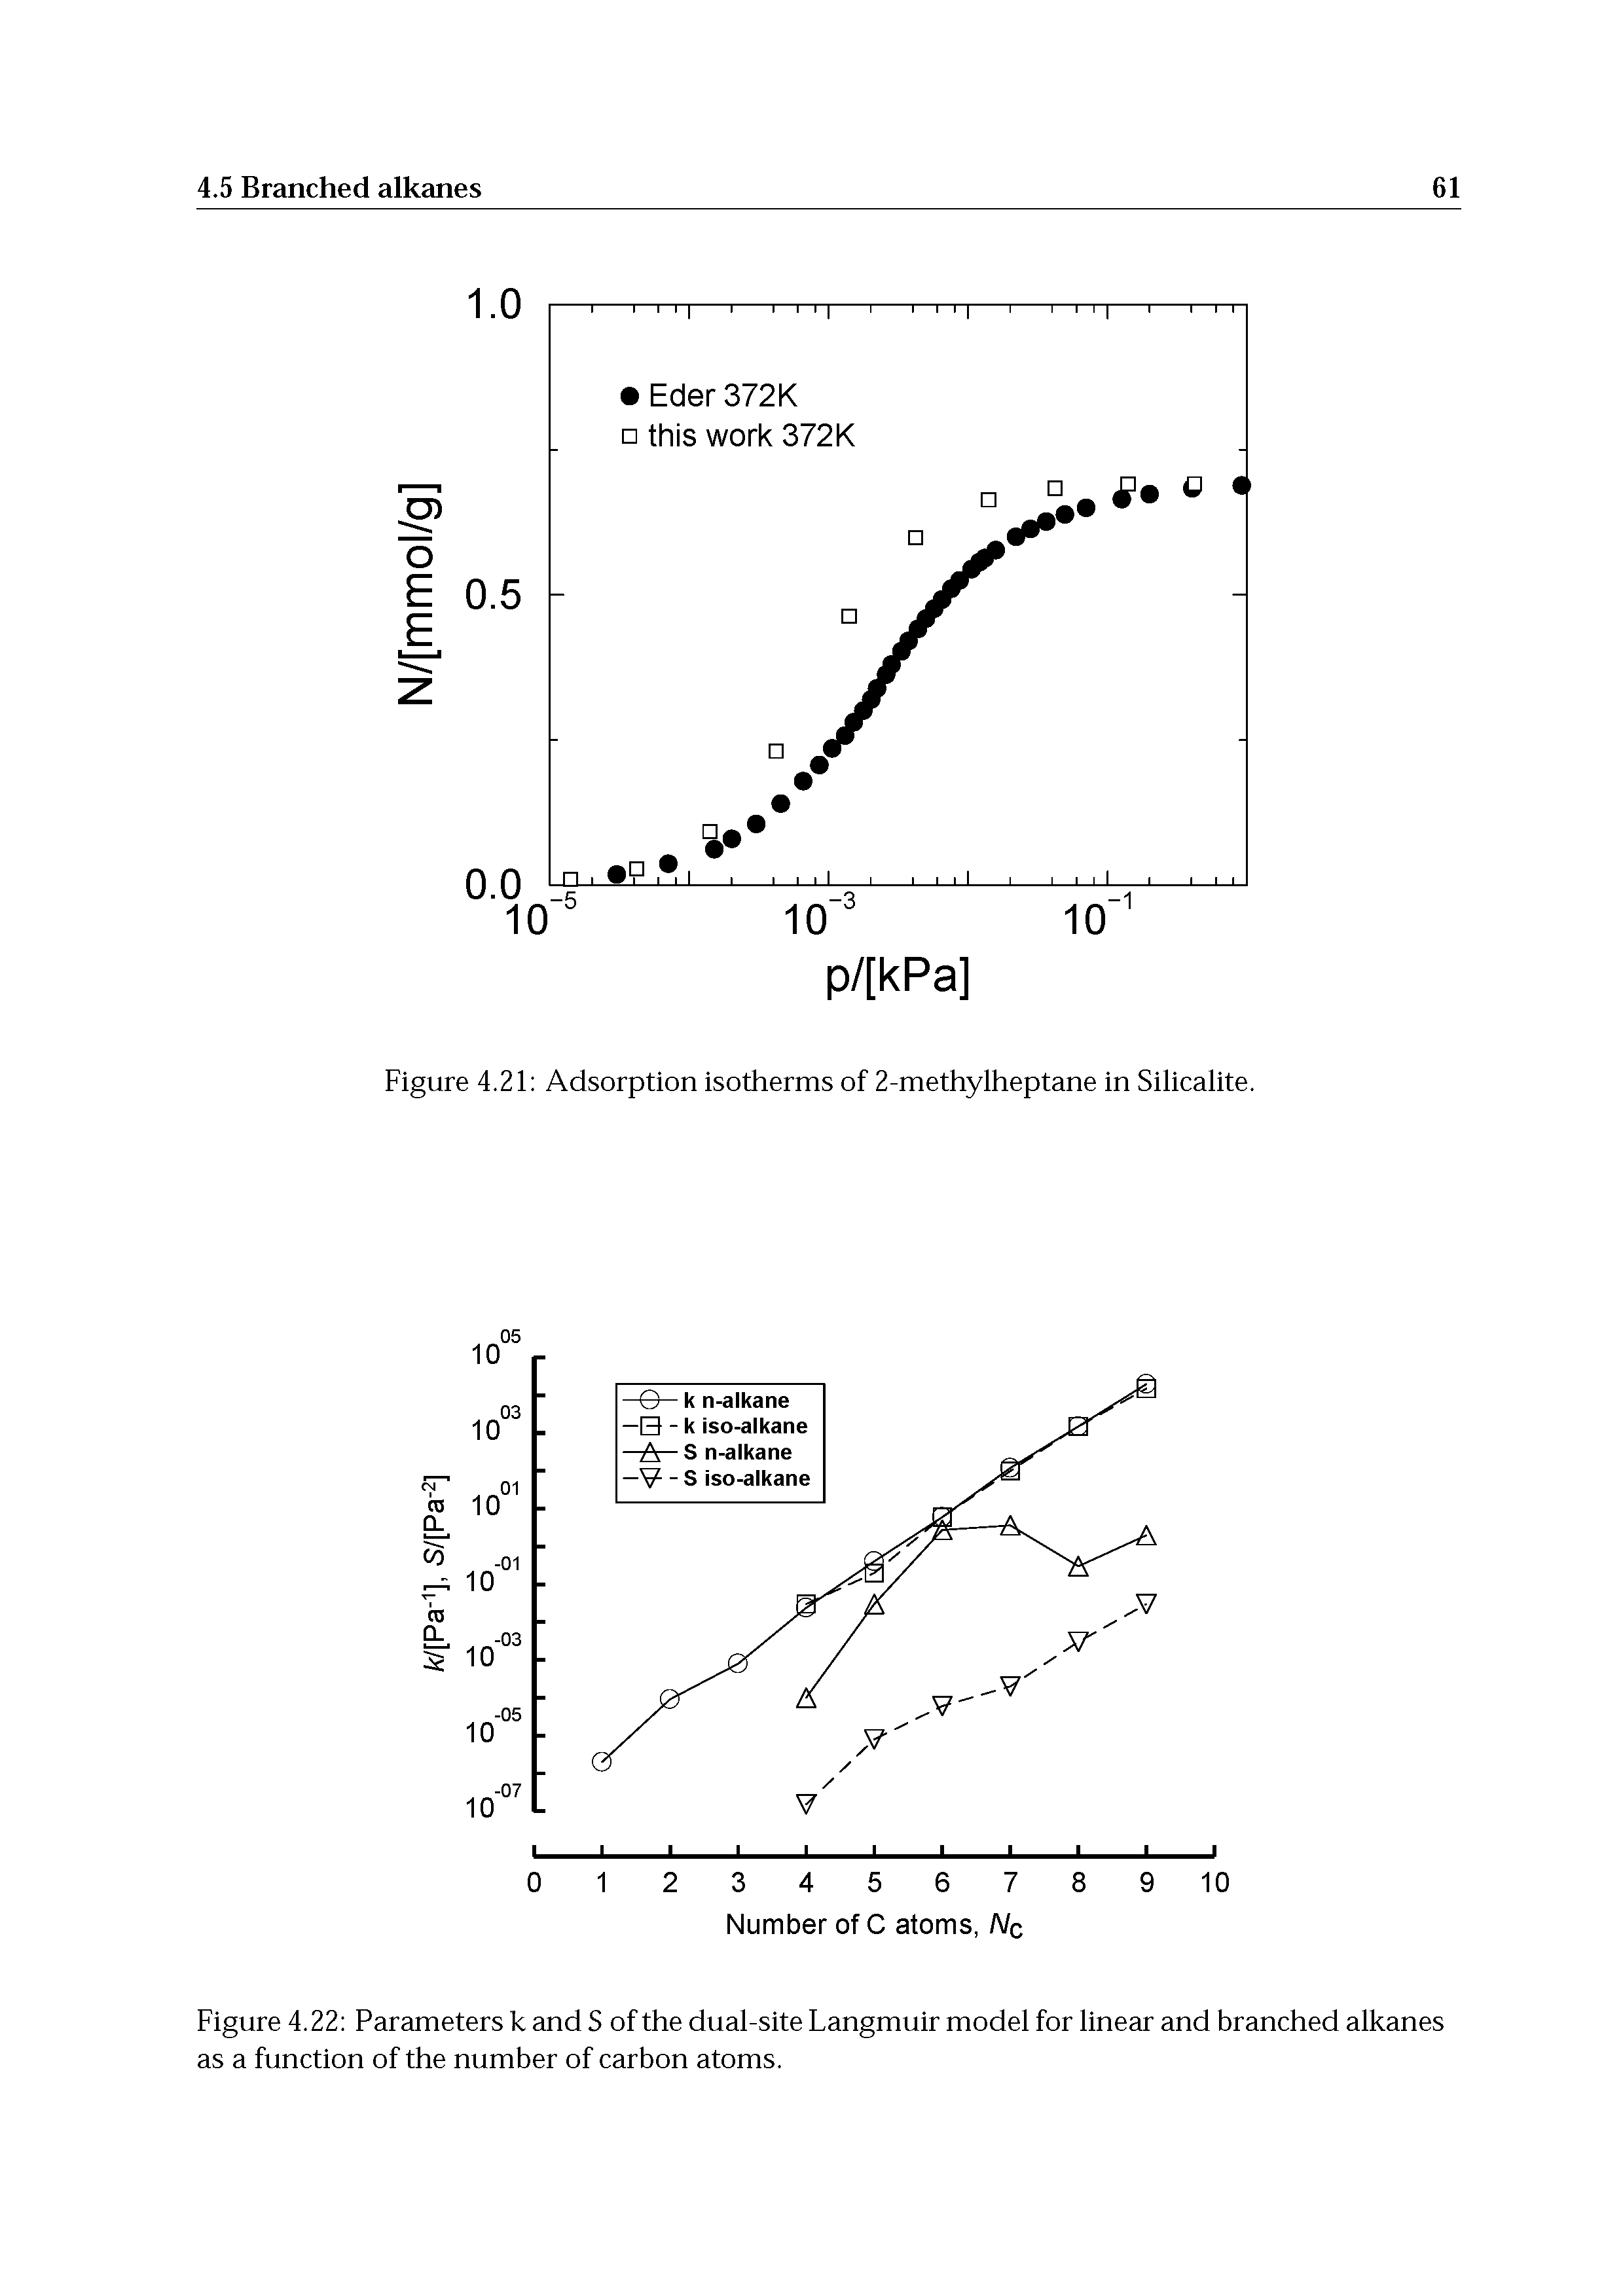 Figure 4.22 Parameters k and S of the dual-site Langmuir model for linear and branched alkanes as a function of the number of carbon atoms.